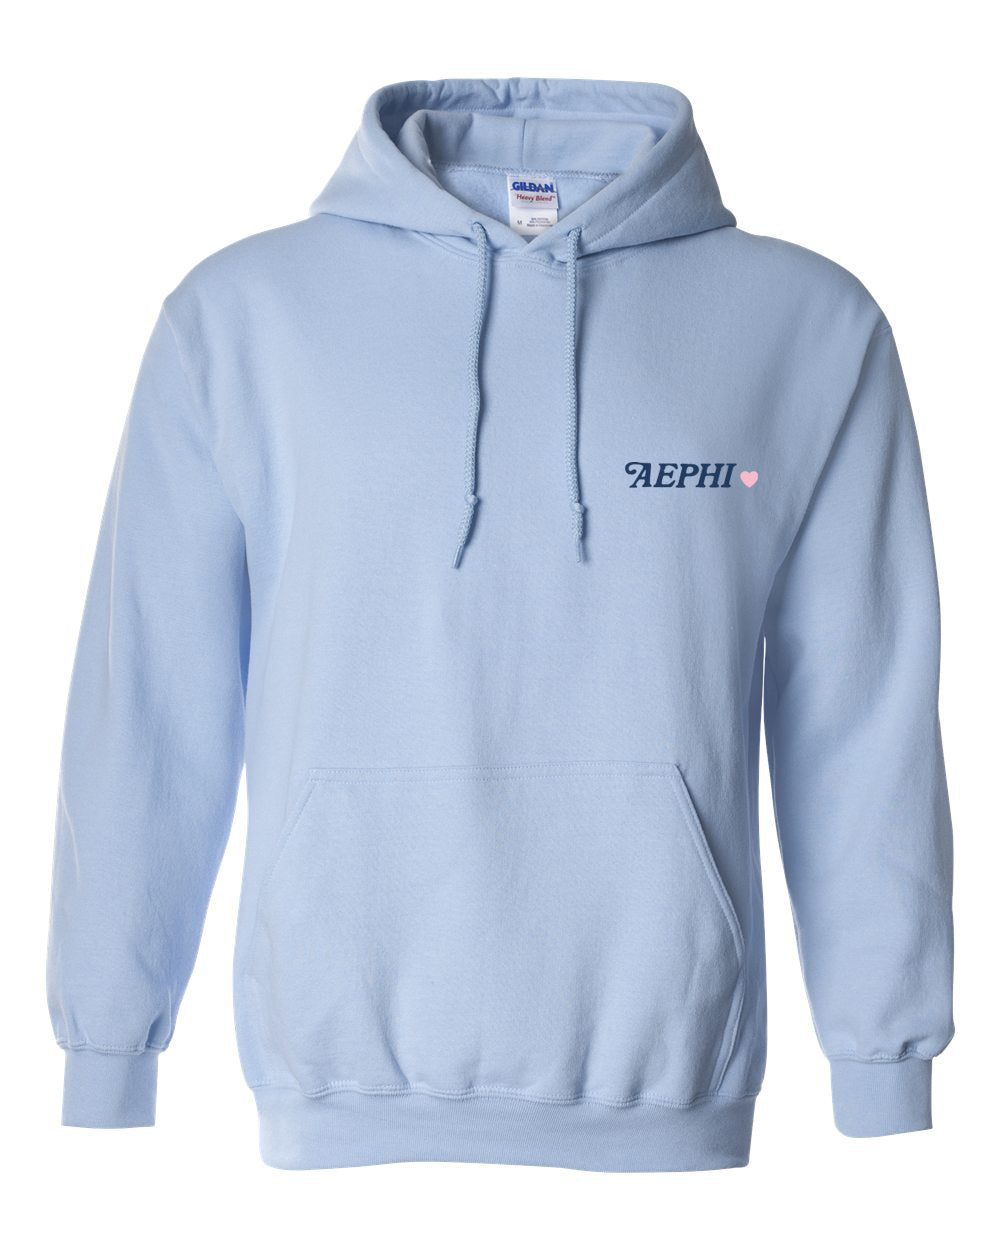 a light blue hoodie with the logo of a company on it